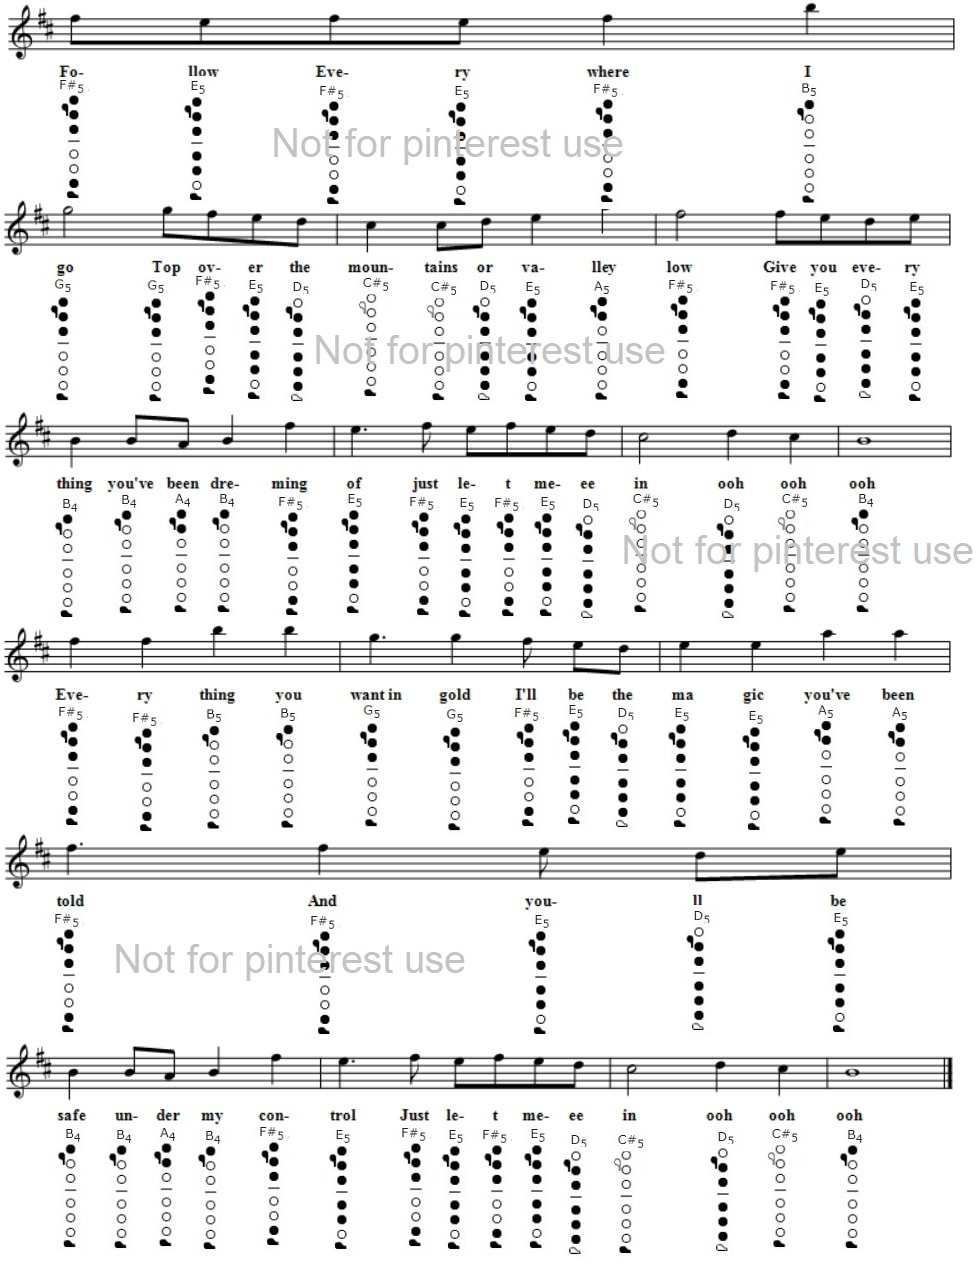 Lily easy flute sheet music with finger position by Alan Walker